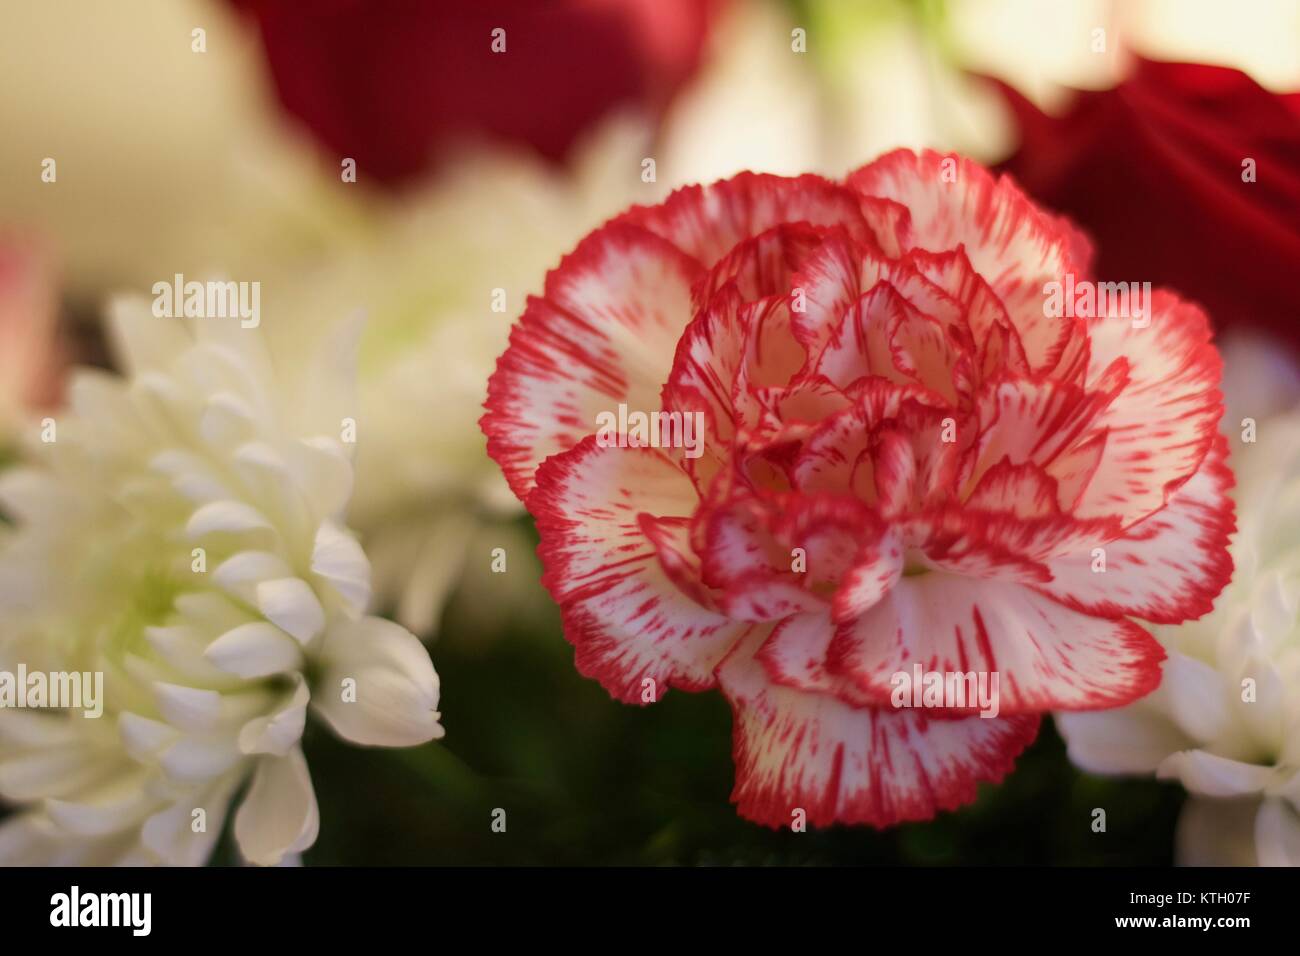 Interior shallow depth of field stock photo of red carnation flower in the foreground and white carnation flowers in the background Stock Photo